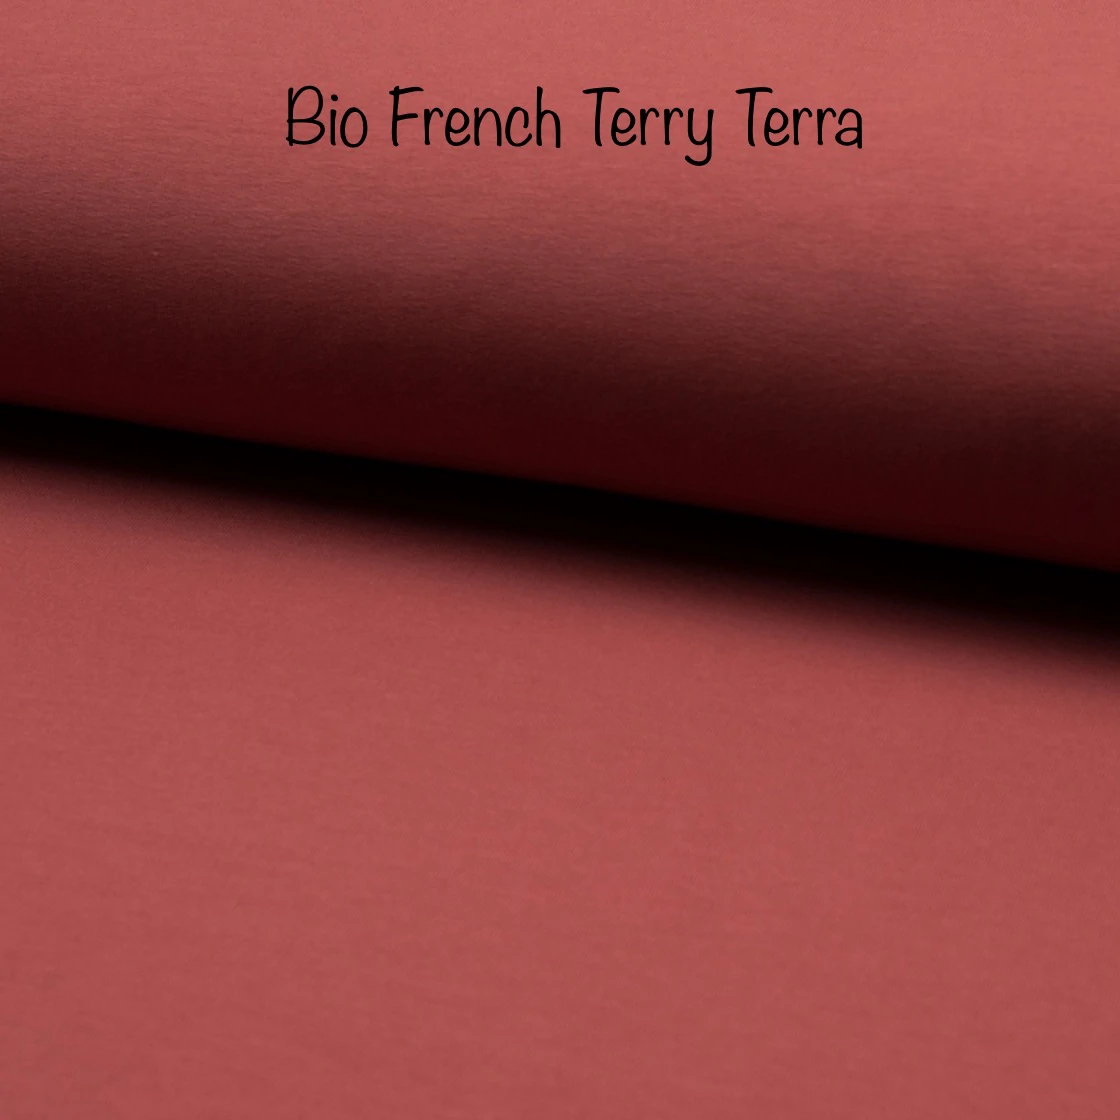 Bio French Terry Stoff Farbe French Terry terra